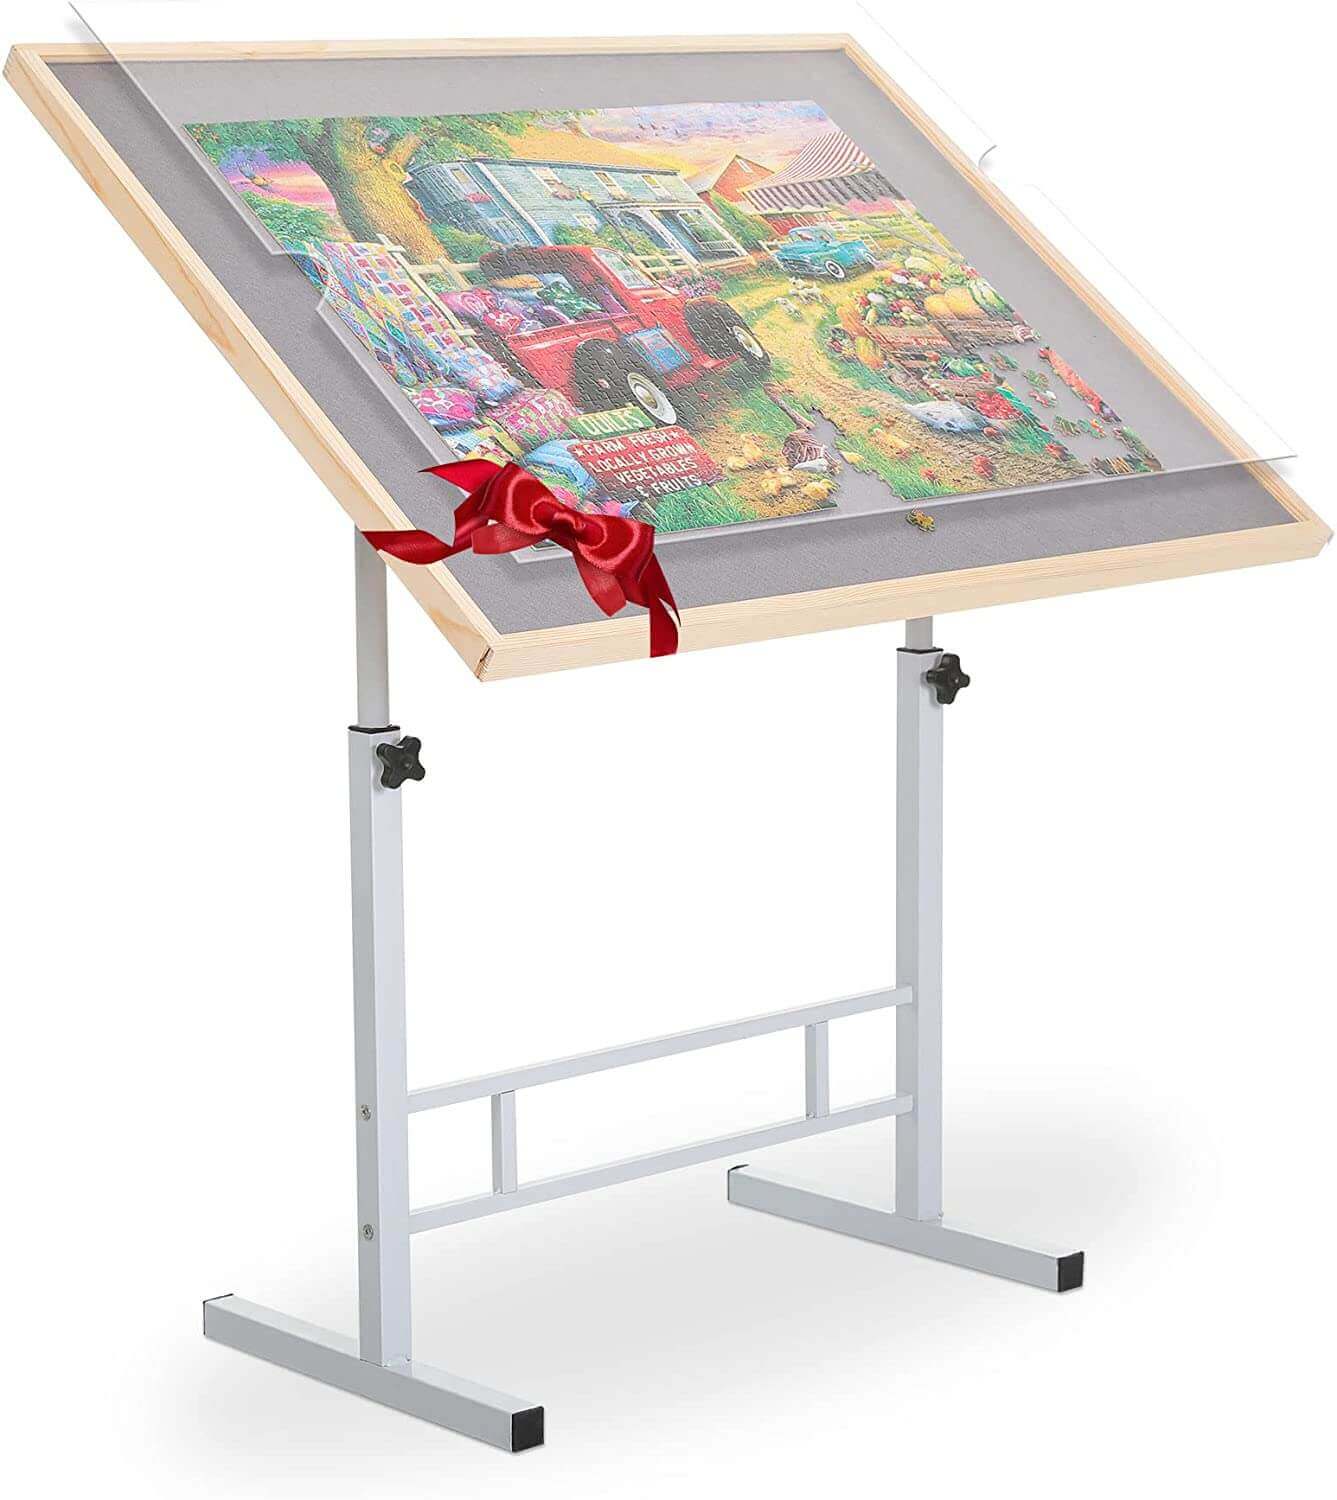 Fanwer jigsaw puzzle table with adjustable iron legs and puzzle board, feature image